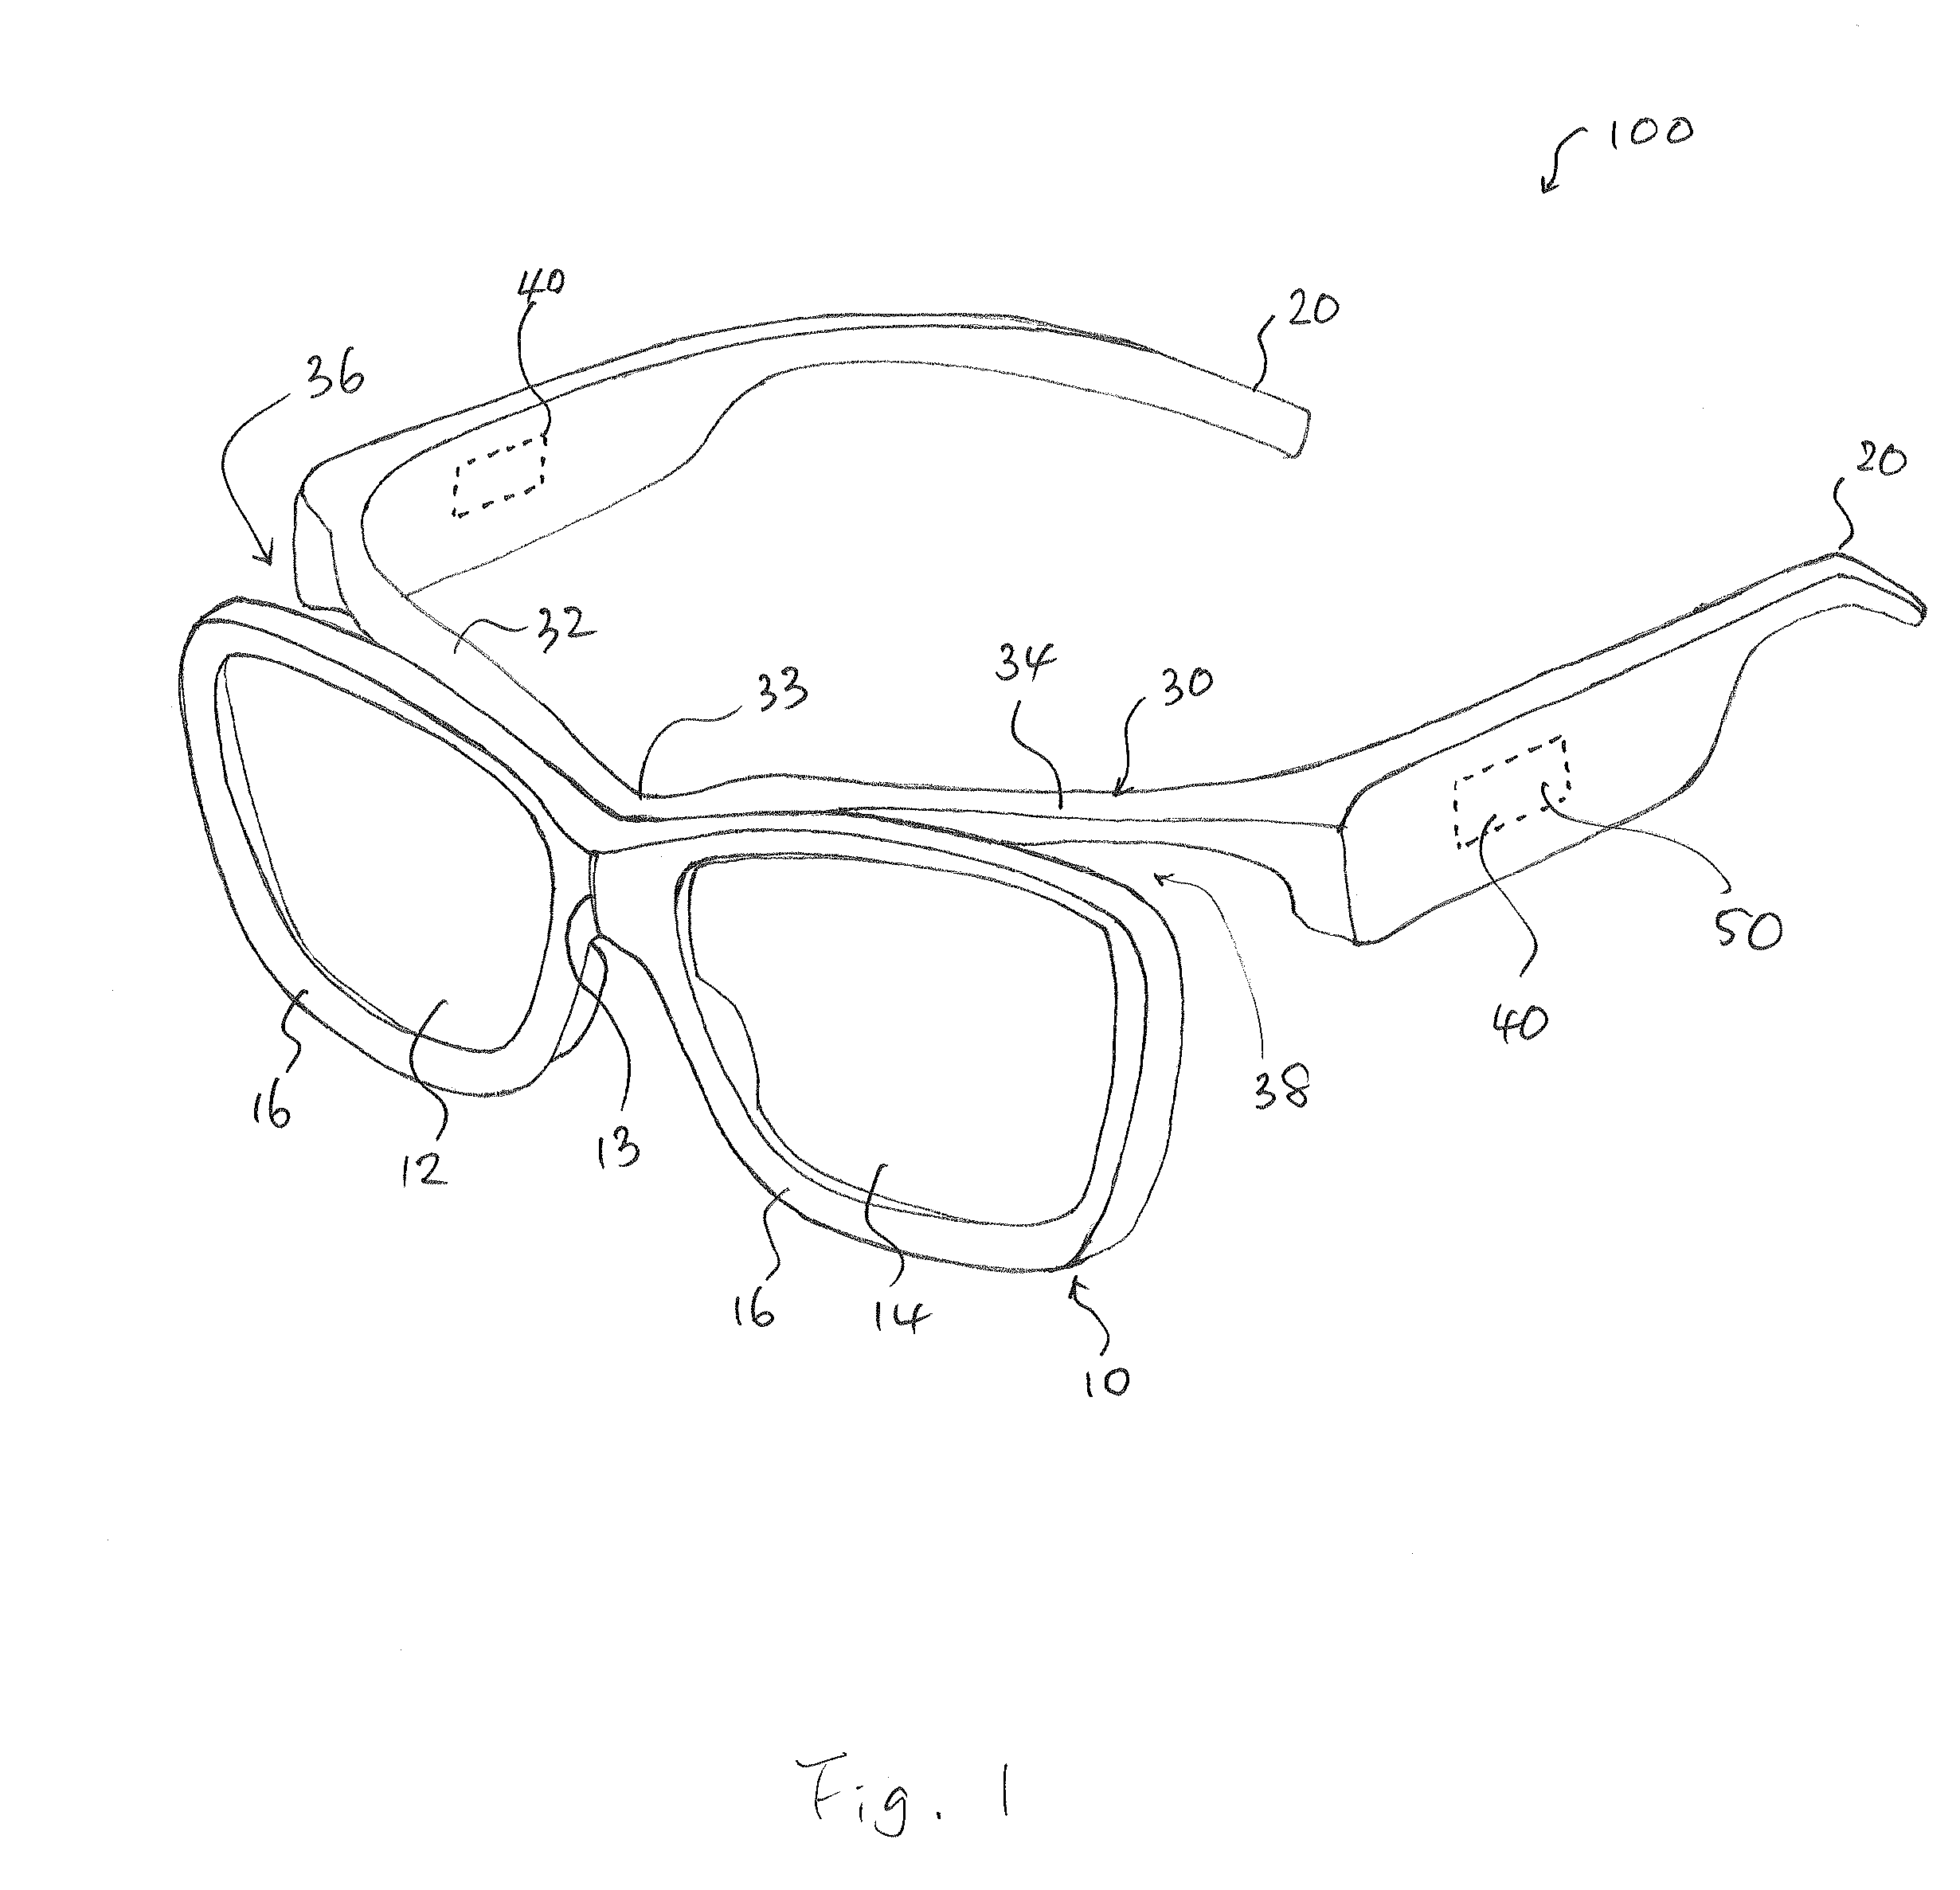 Reusable 3D Glasses Embedded with RFID and RF-EAS Tags for use at 3D Movie Theatres